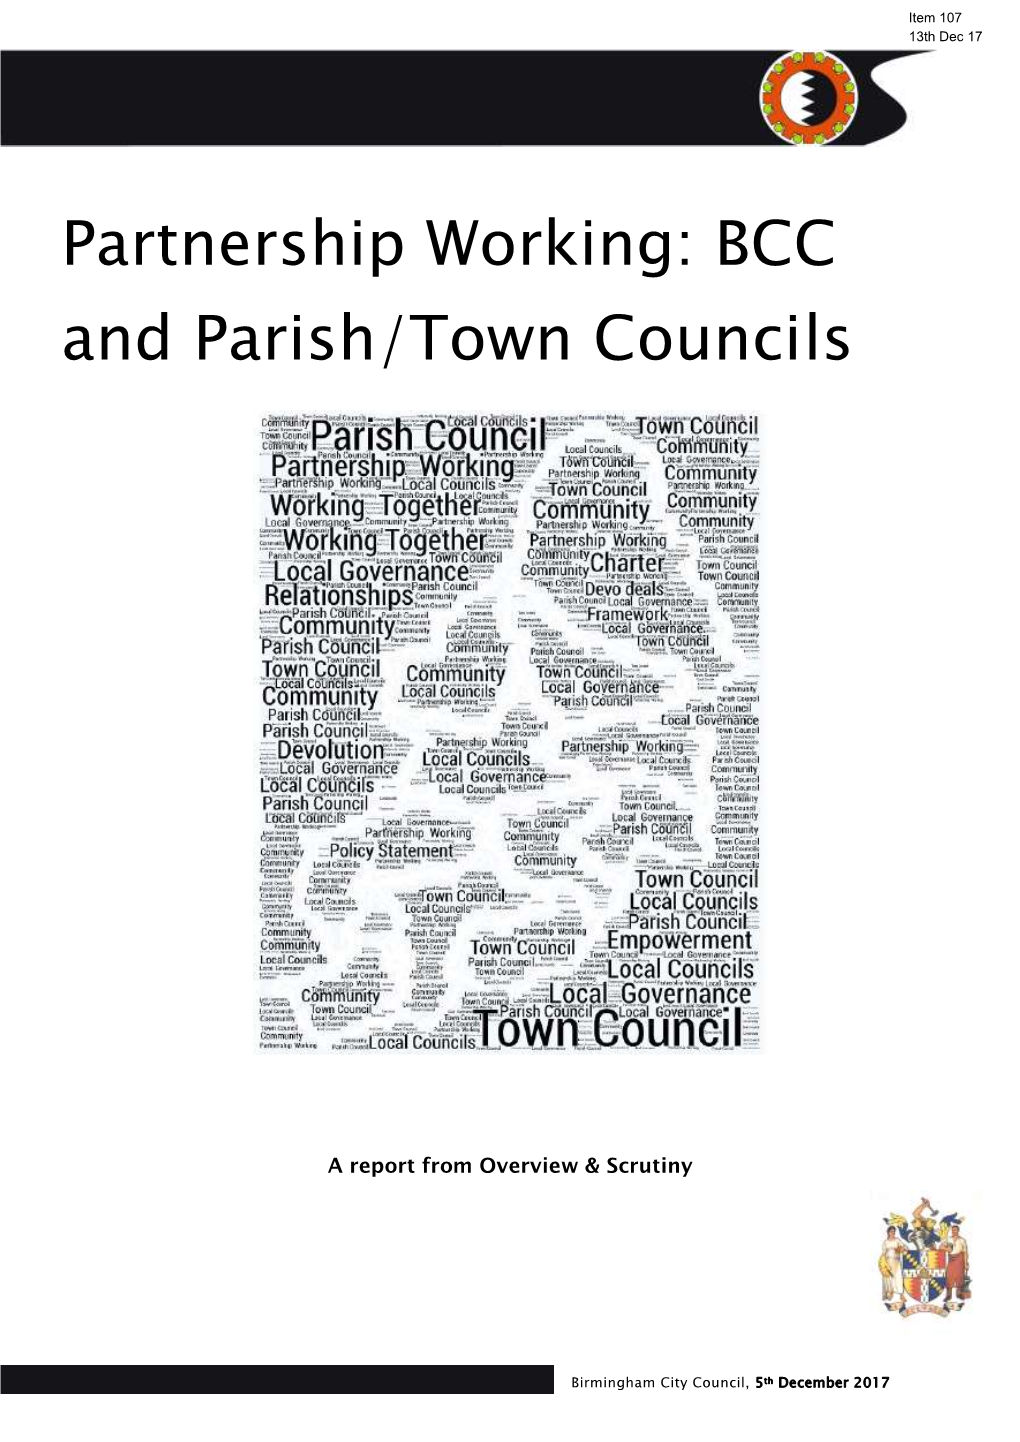 Partnership Working: BCC and Parish/Town Councils